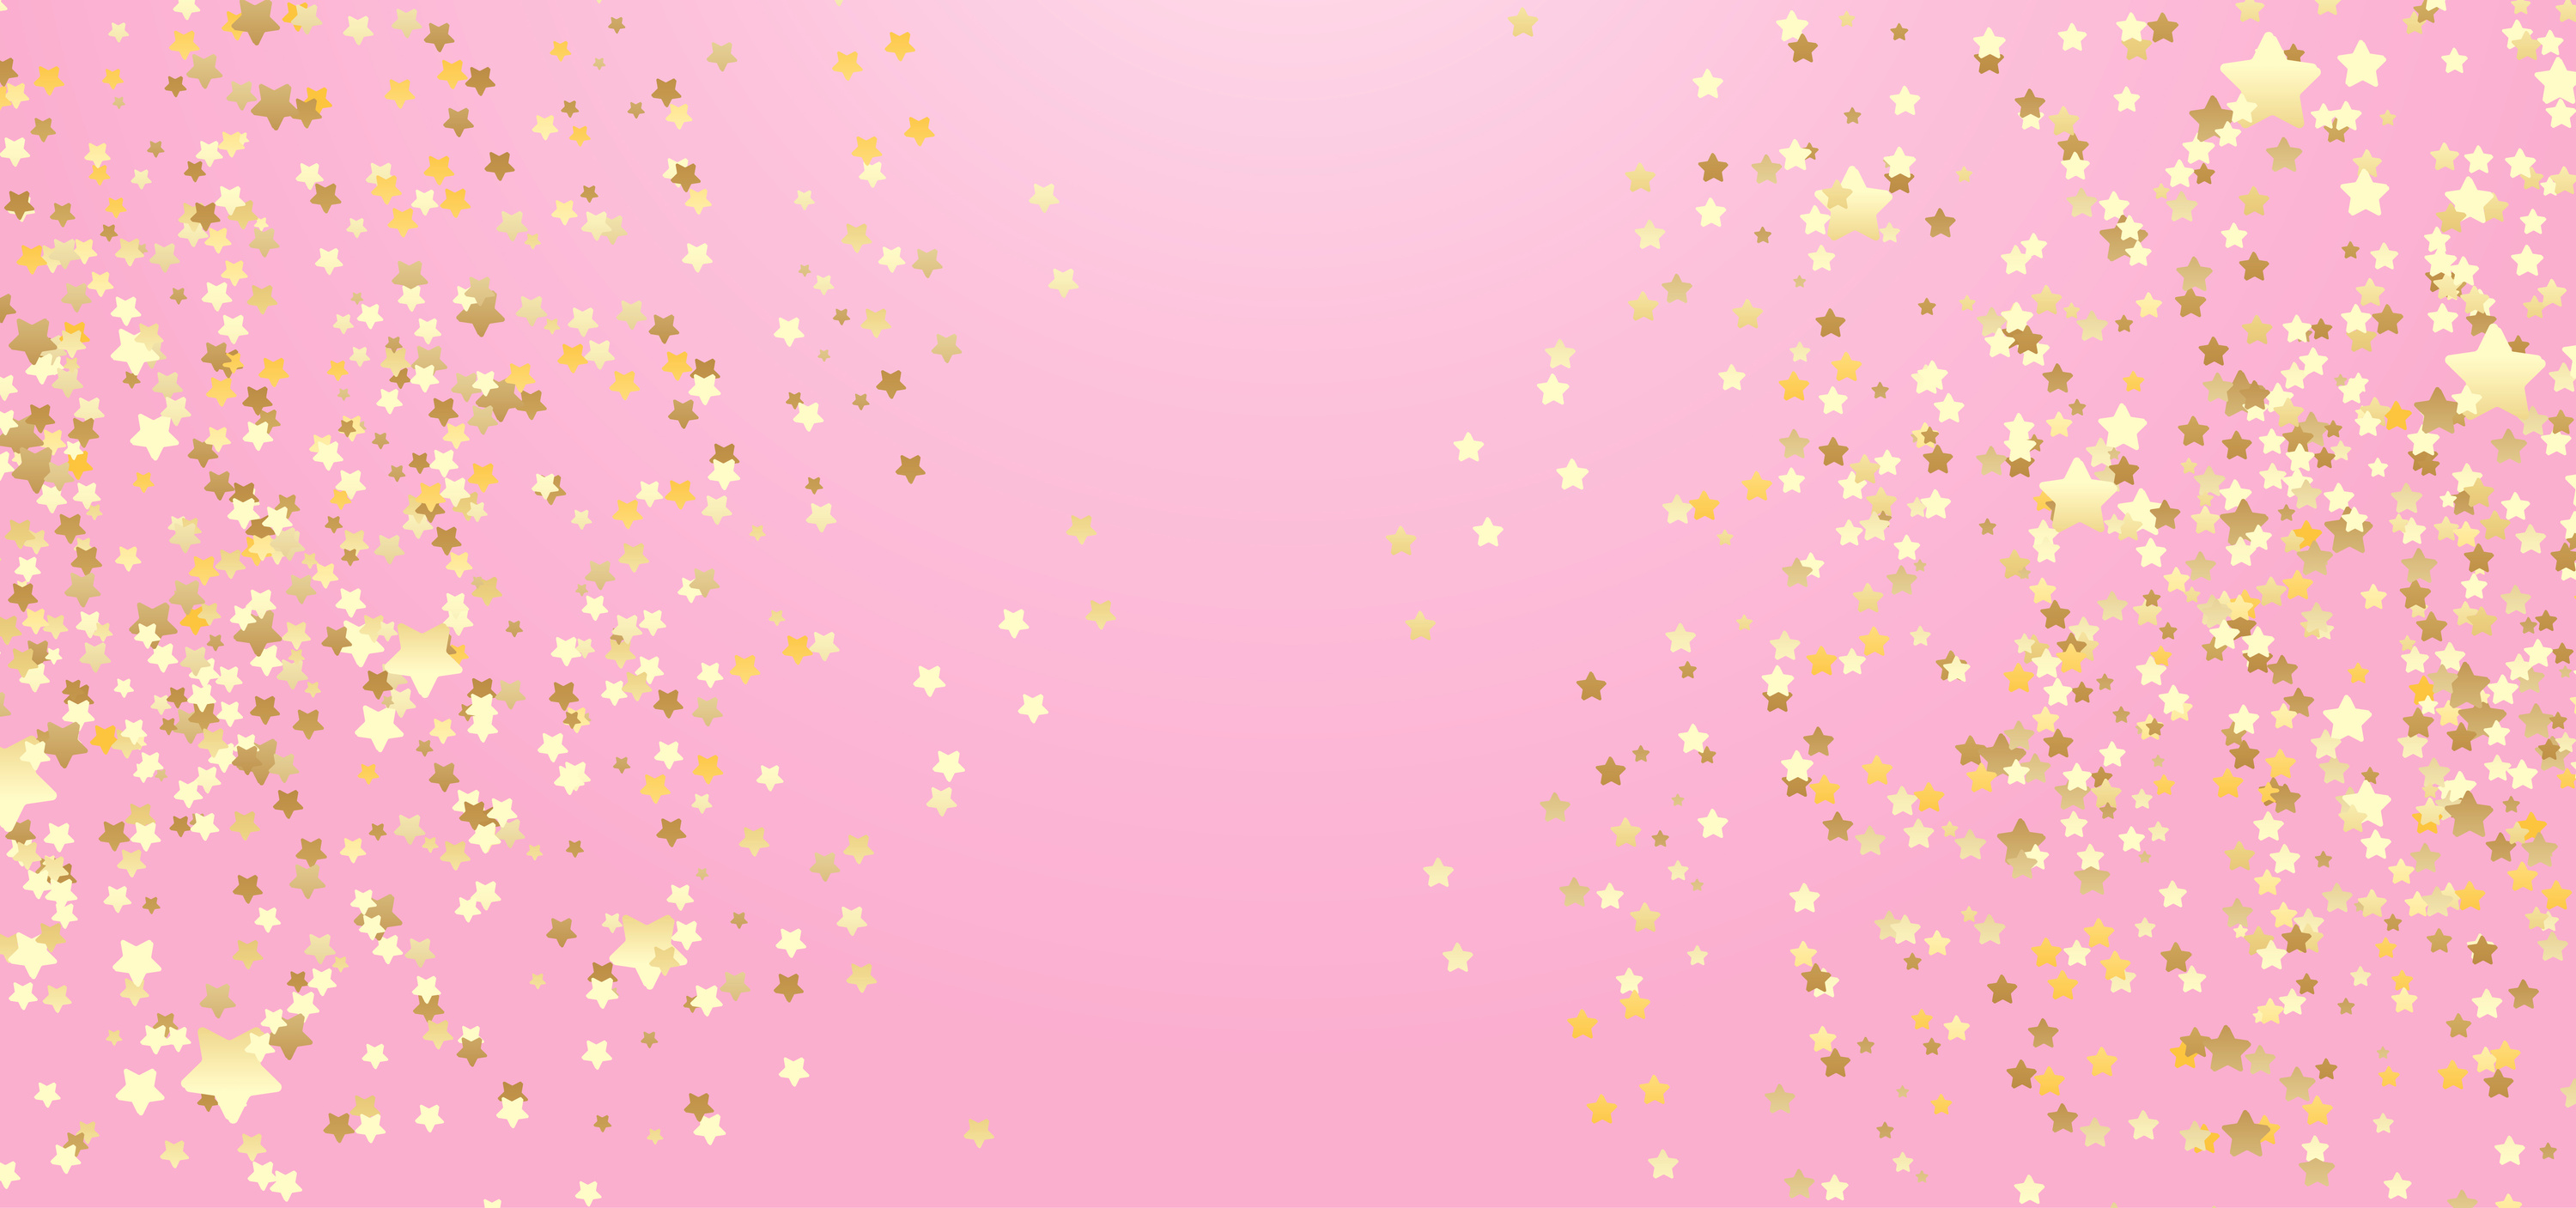 Gold Stars on Pink Background